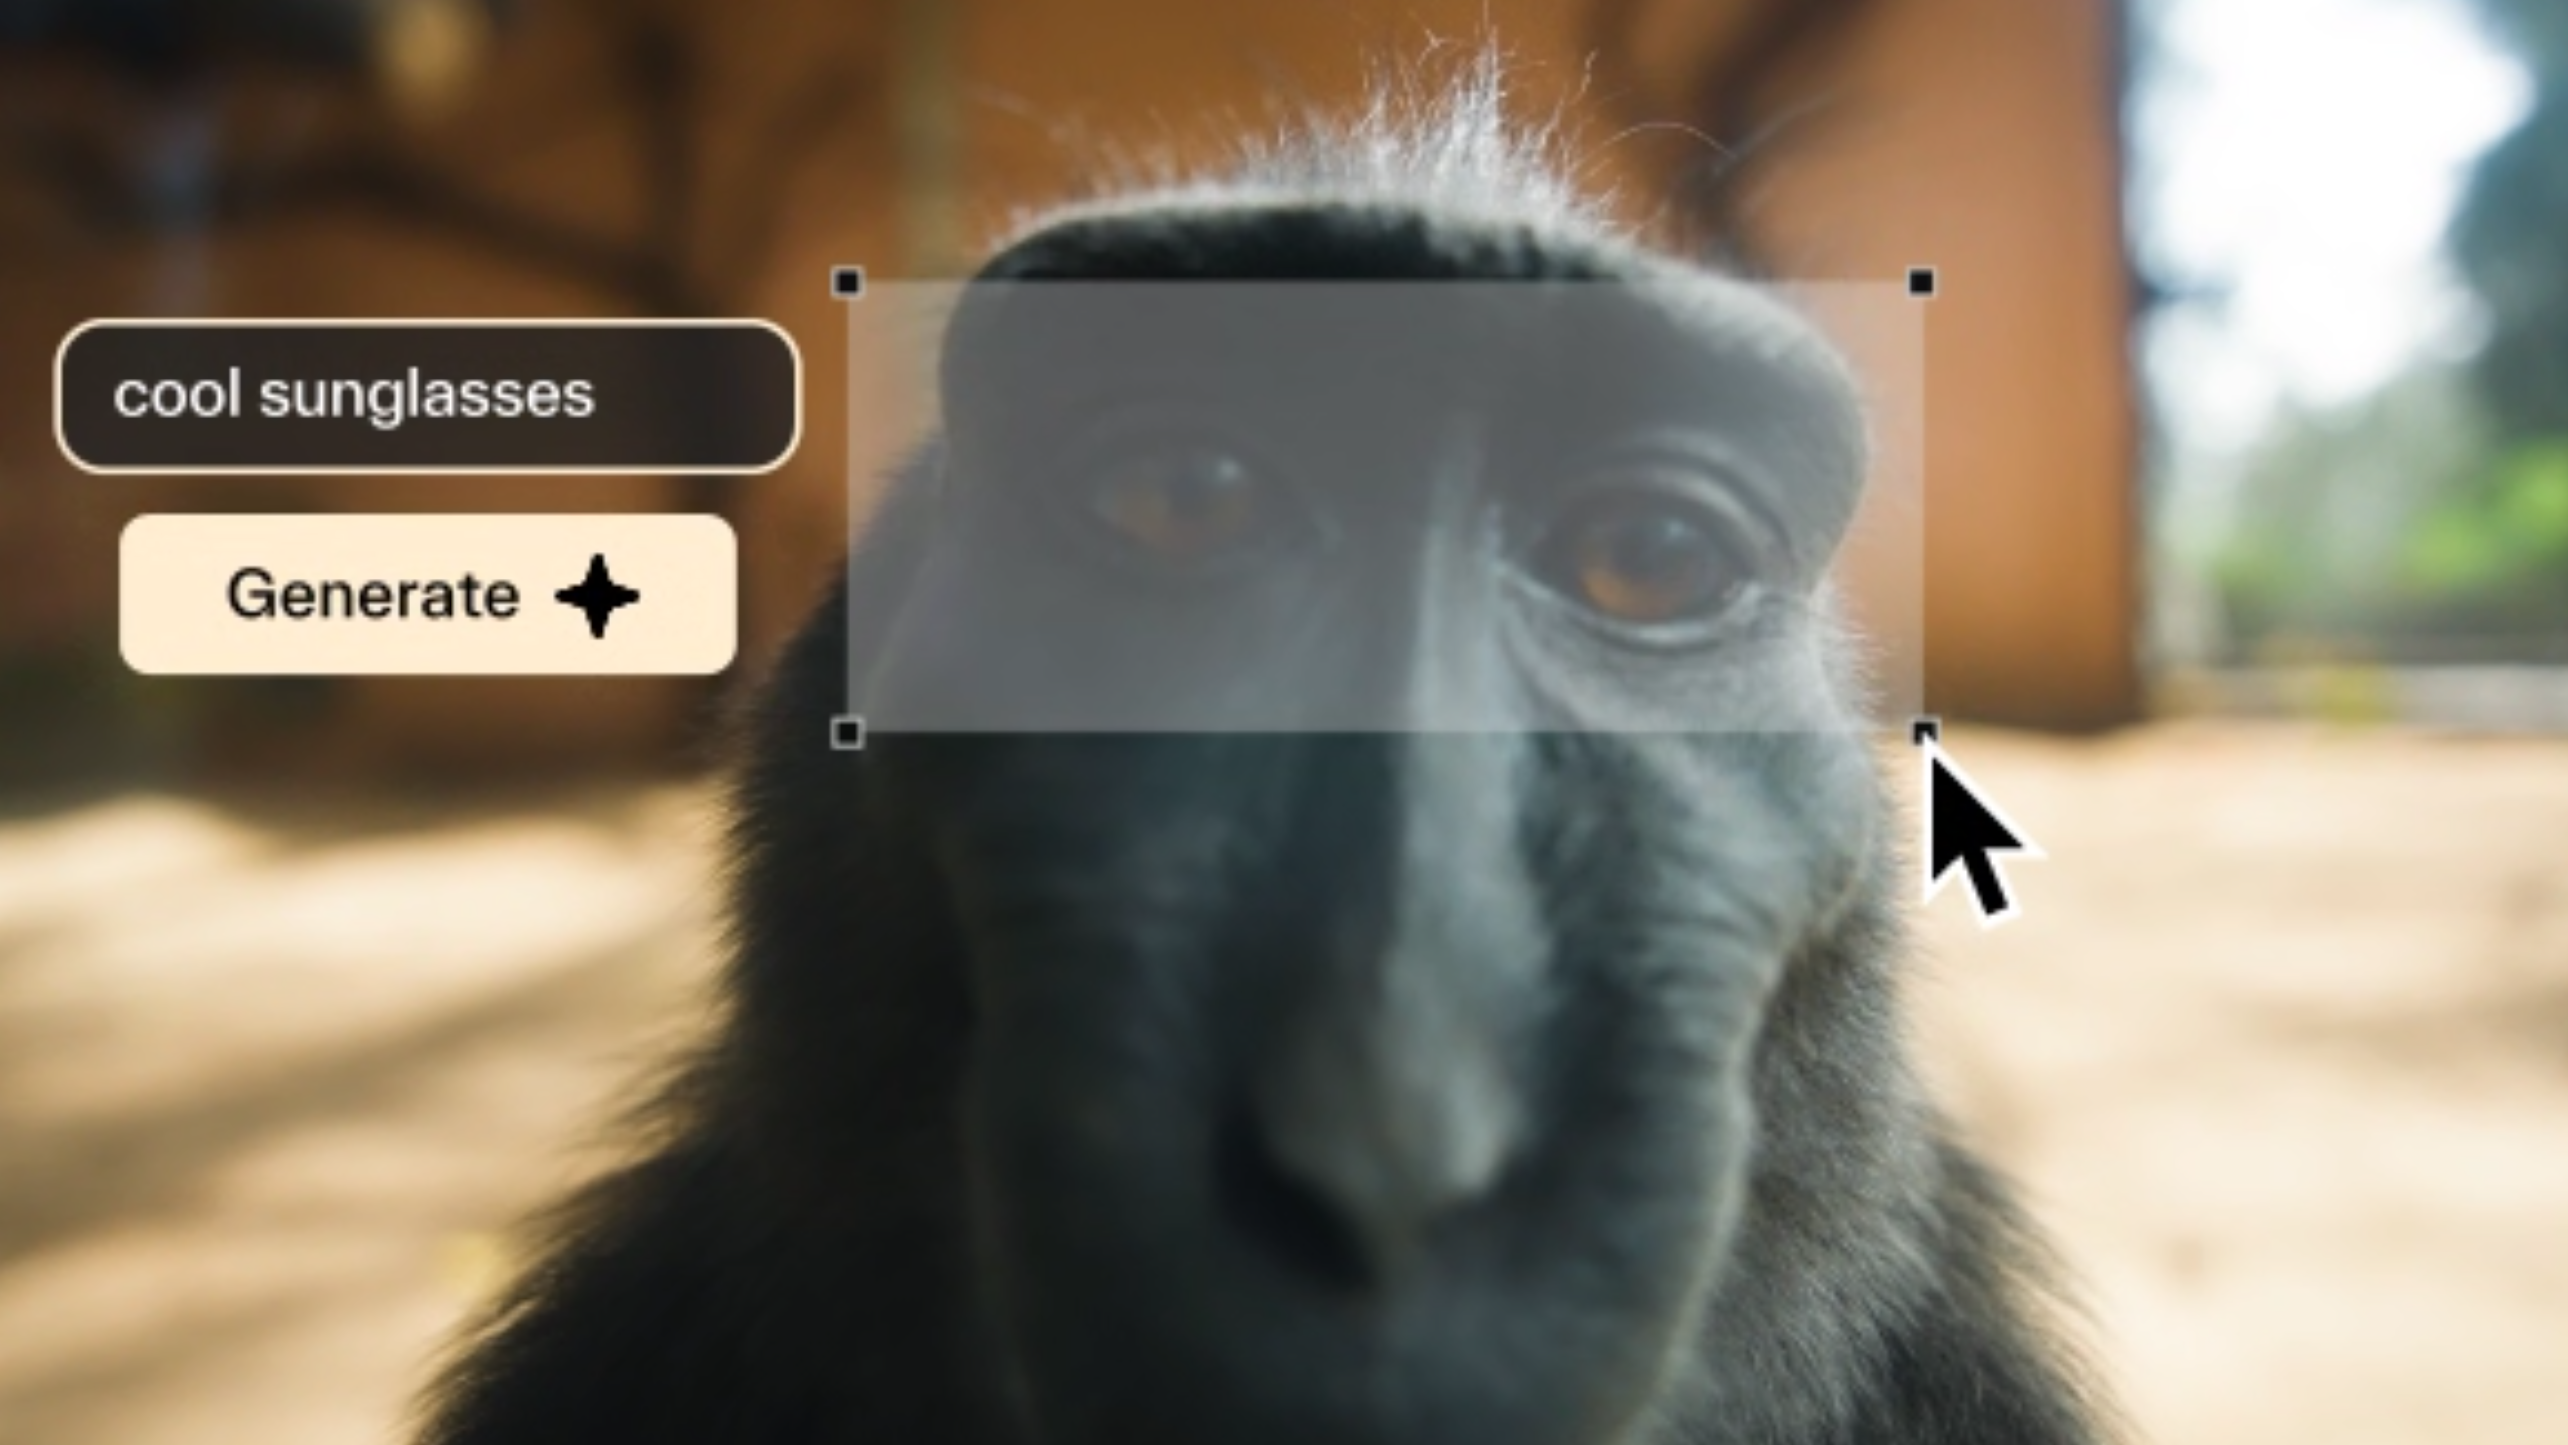 Pika Labs launches version 1.0 of its impressive AI video generator